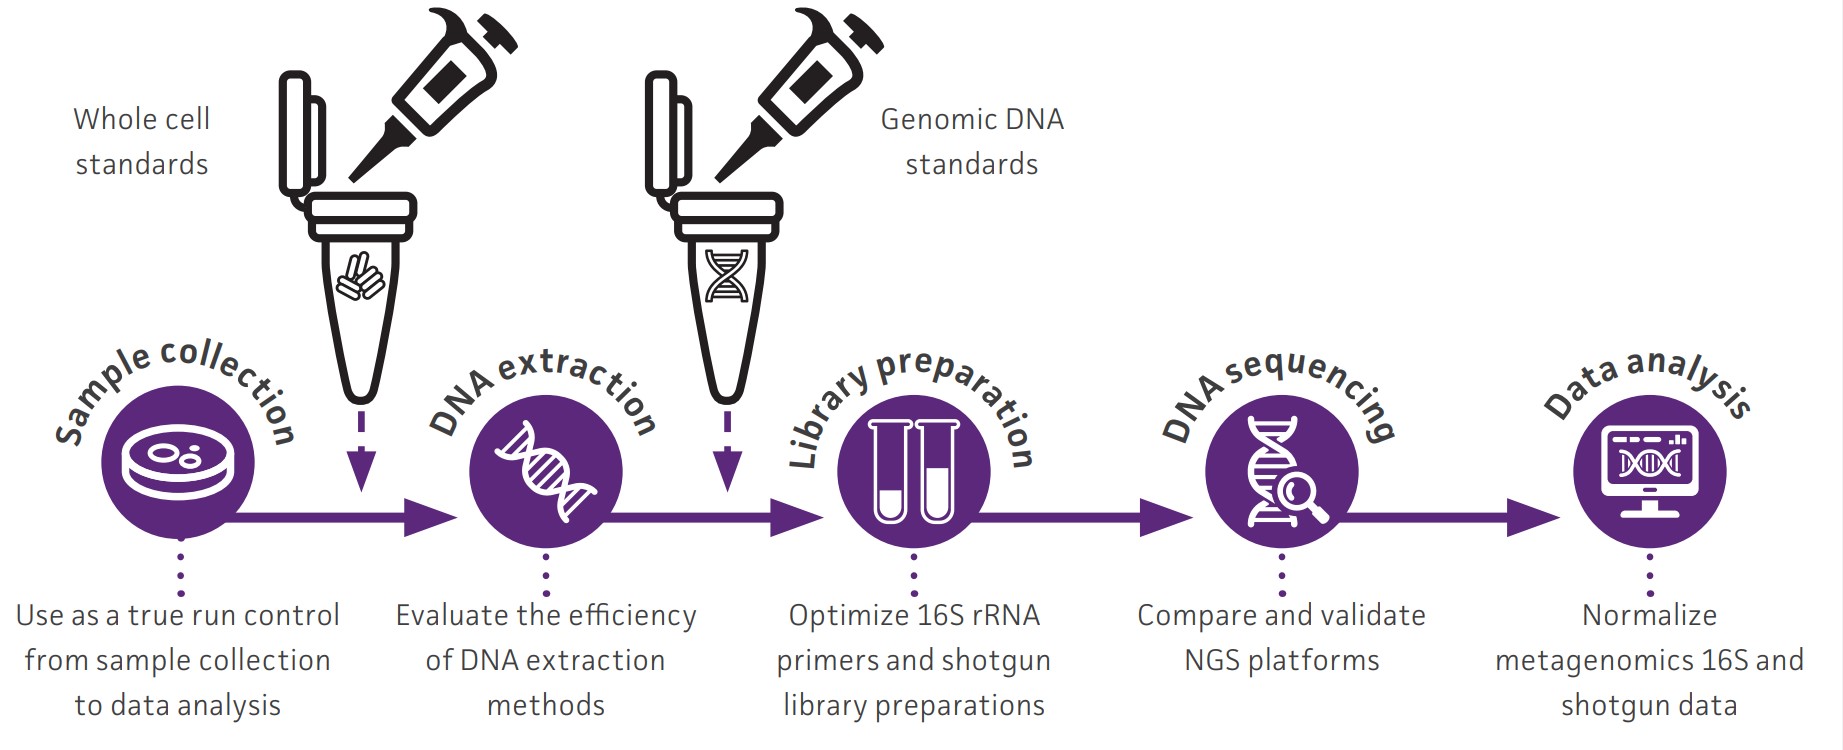 Use of NGS Standards throughout a next-generation sequencing workflow